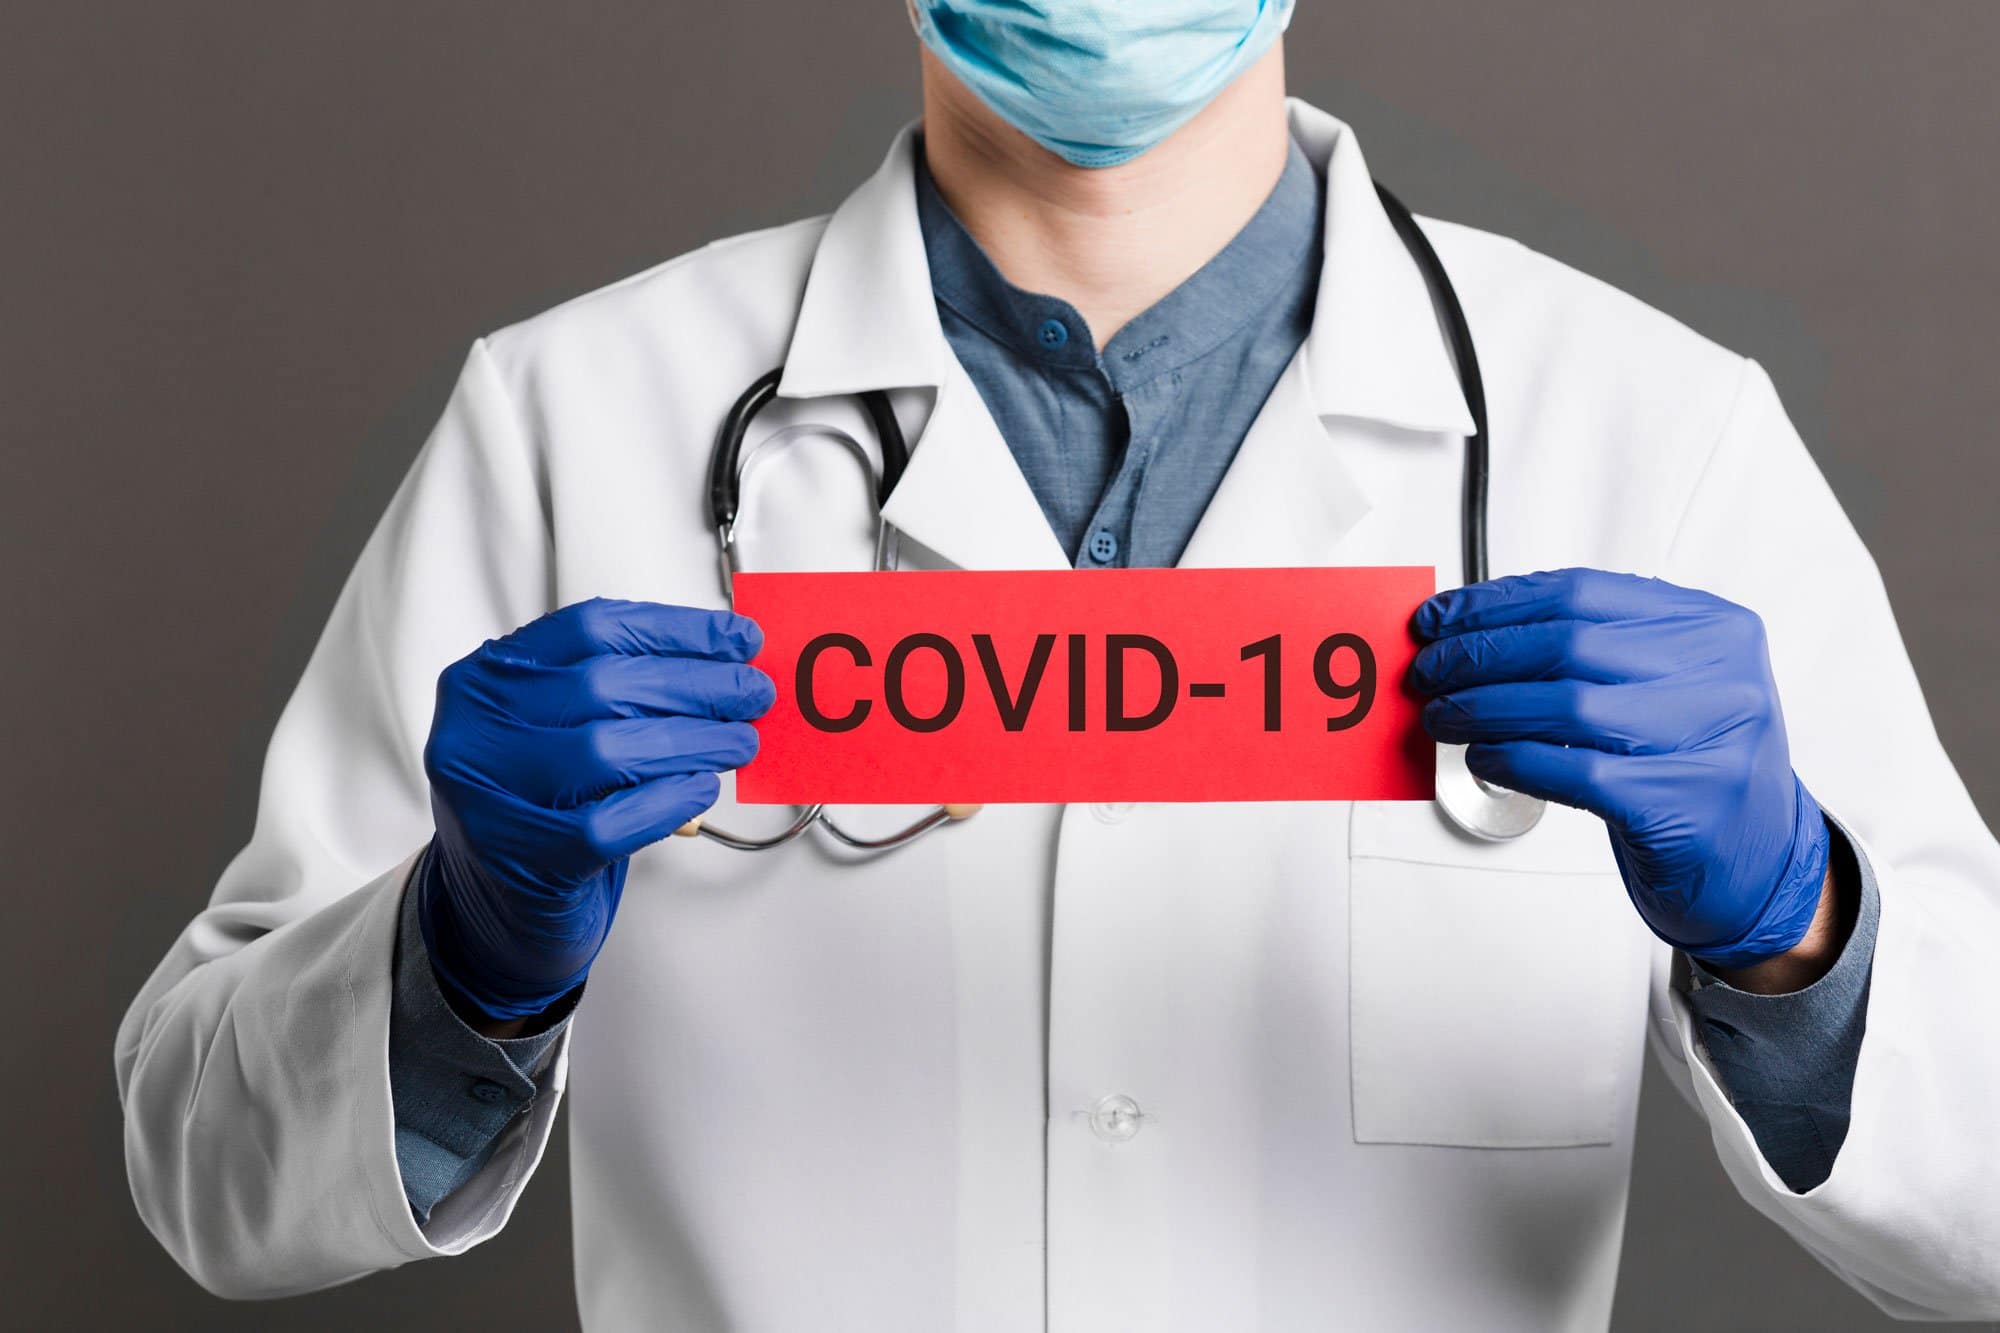 Doctor wearing mask and gloves holding a COVID-19 sign